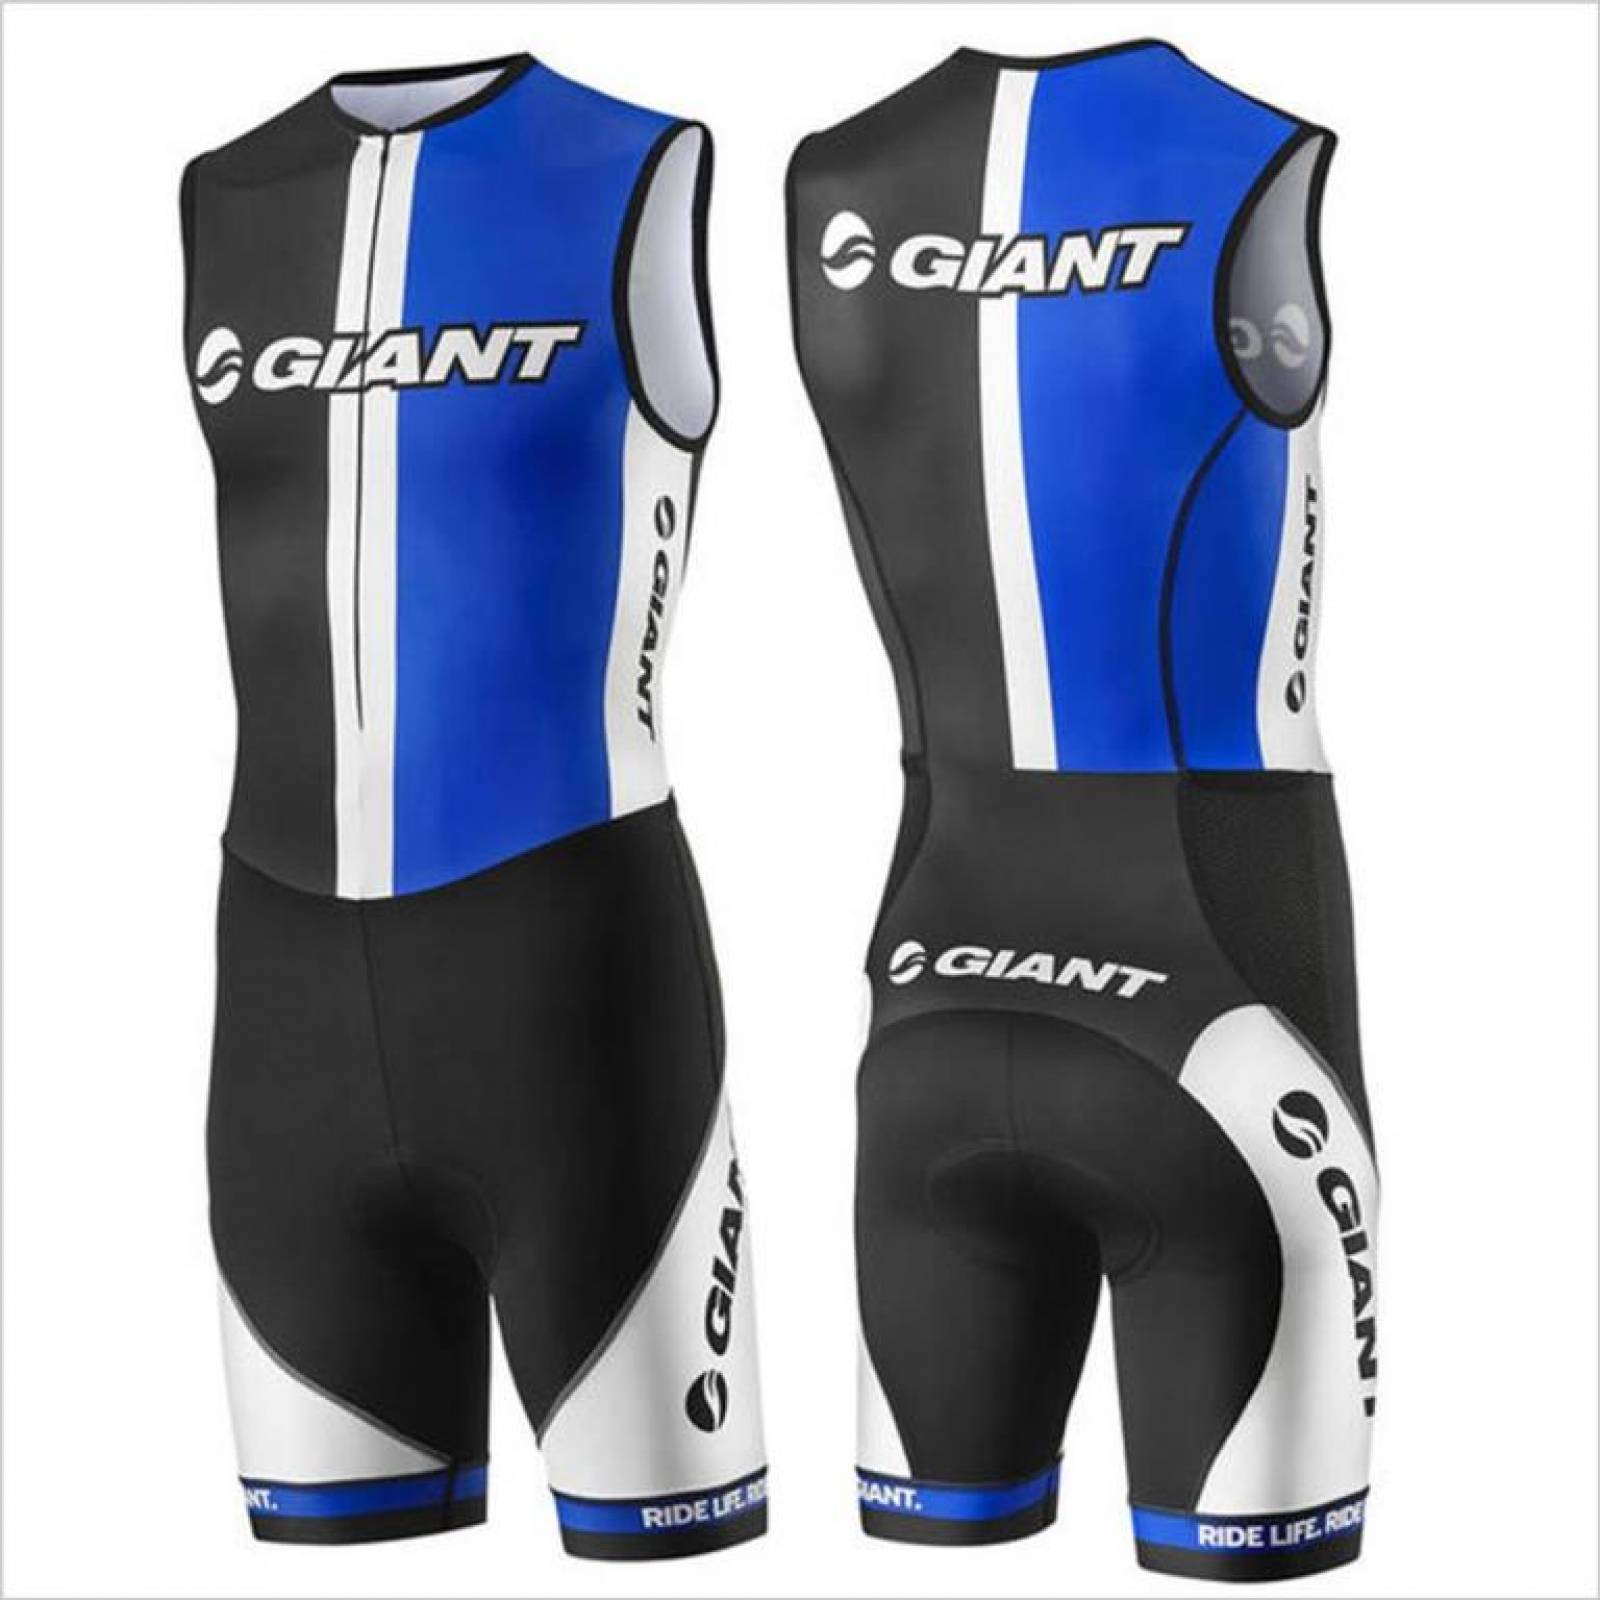 TRI SUIT GIANT RACE DAY